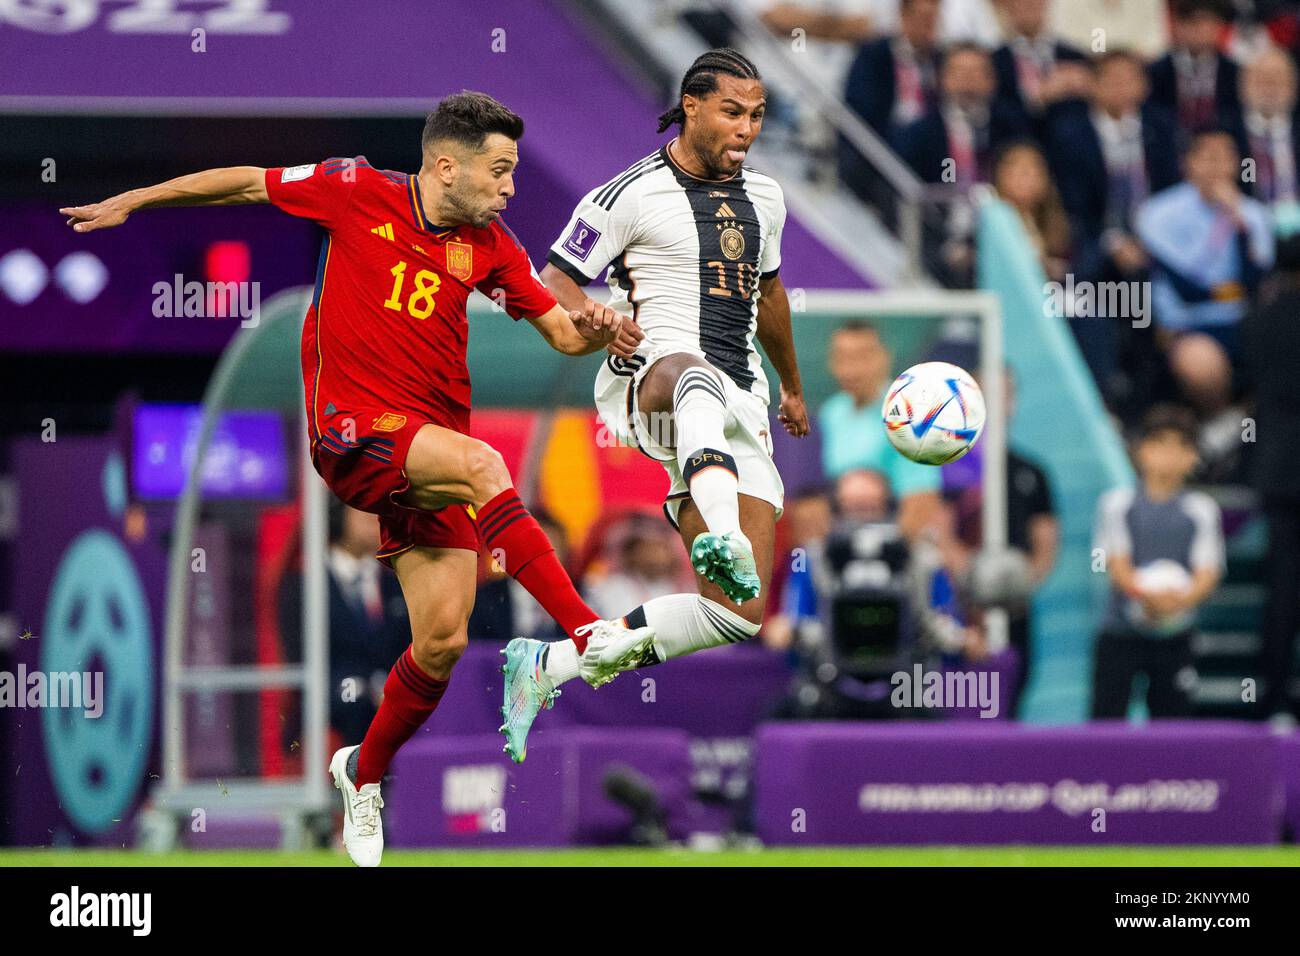 AL-KHOR, AK - 27.11.2022: SPAIN VS GERMANY - Serge Gnabry of Germany and Jordi Alba of Spain during a match between Spain and Germany, valid for the group stage of the World Cup, held at Al Bayt Stadium in Al-Khor, Qatar. (Photo: Richard Callis/Fotoarena/Sipa USA) Stock Photo